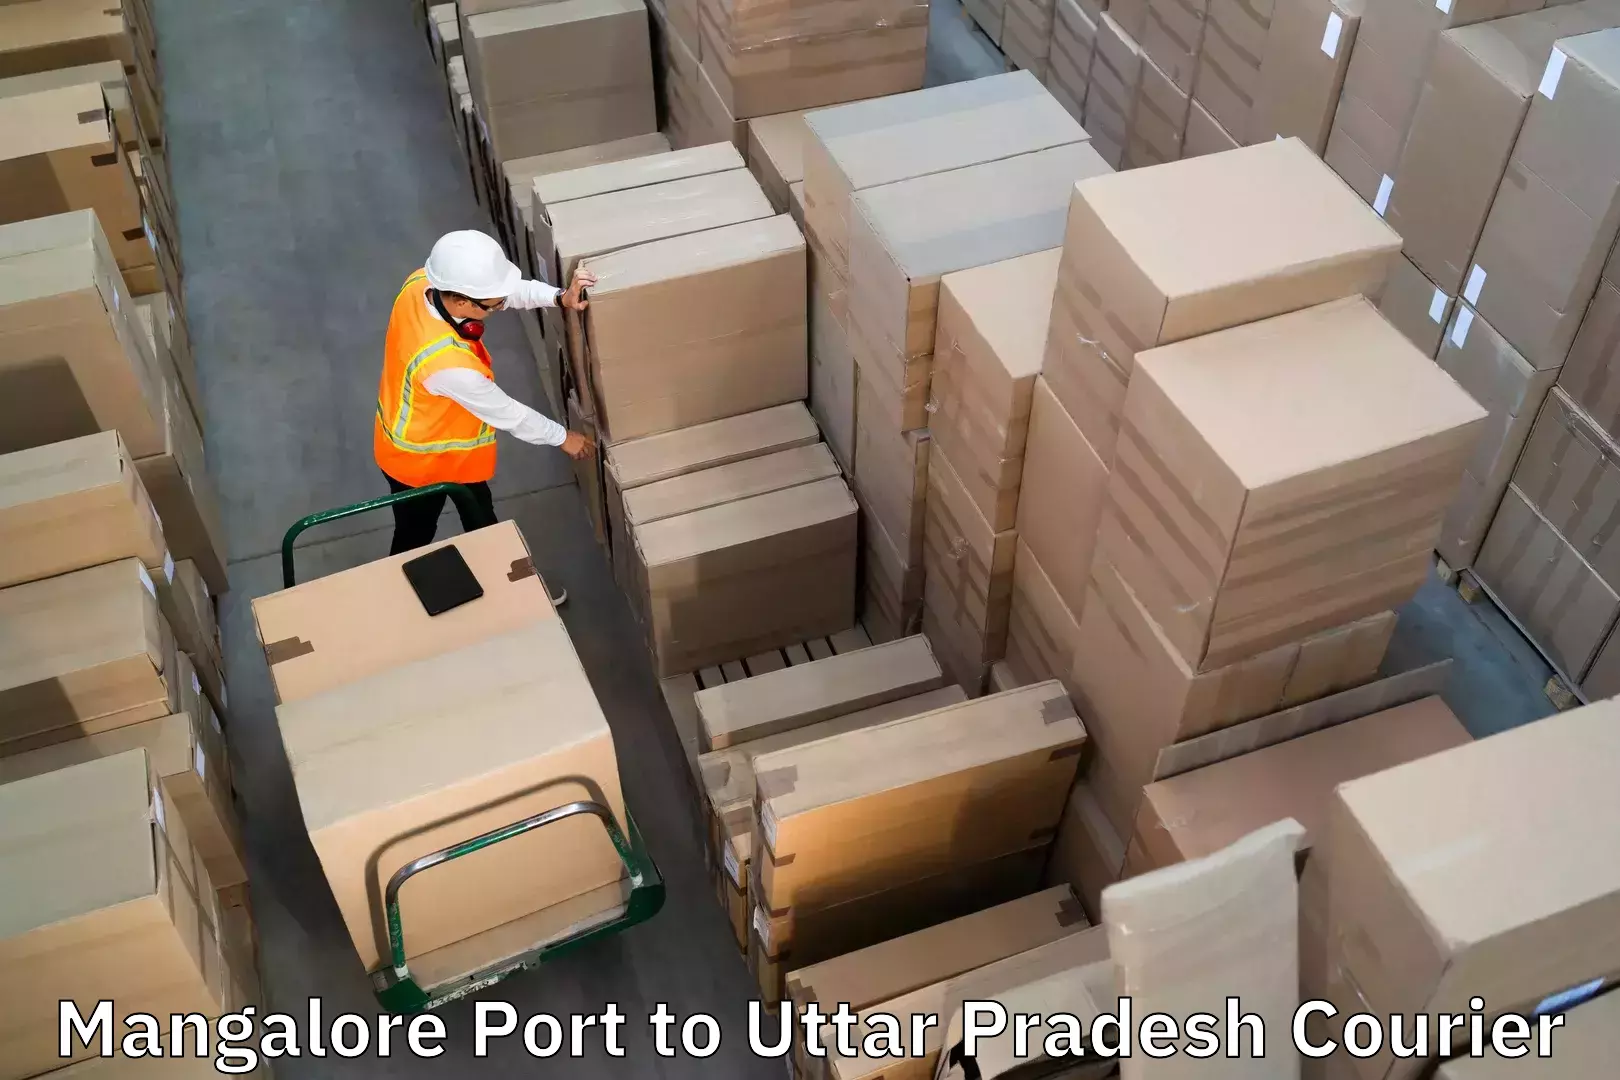 Luggage delivery operations in Mangalore Port to Mahrauni